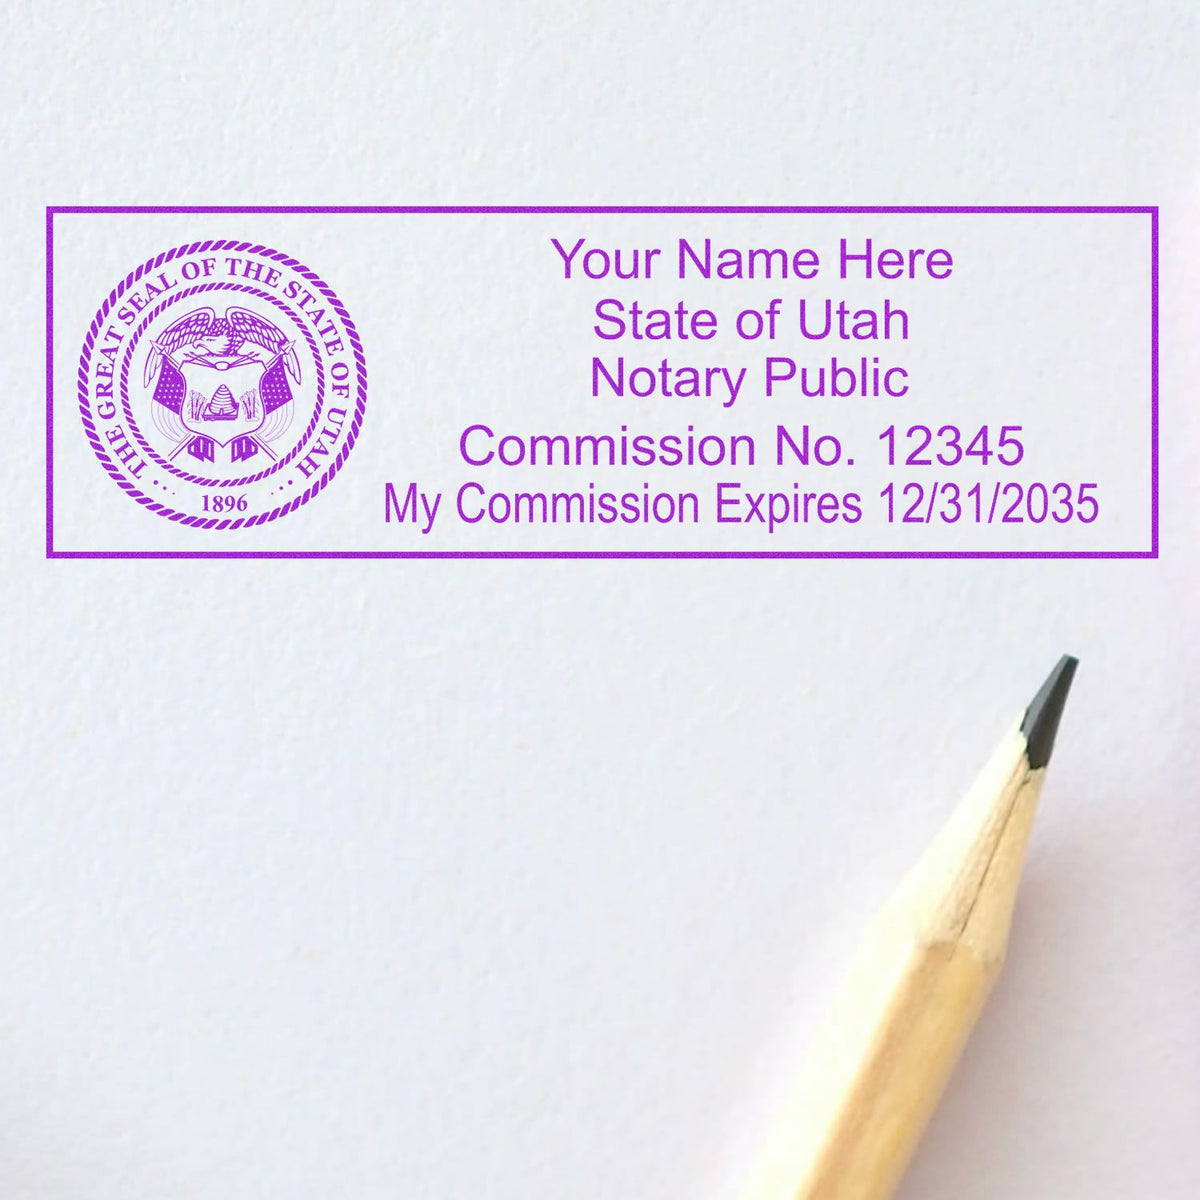 The Slim Pre-Inked State Seal Notary Stamp for Utah stamp impression comes to life with a crisp, detailed photo on paper - showcasing true professional quality.